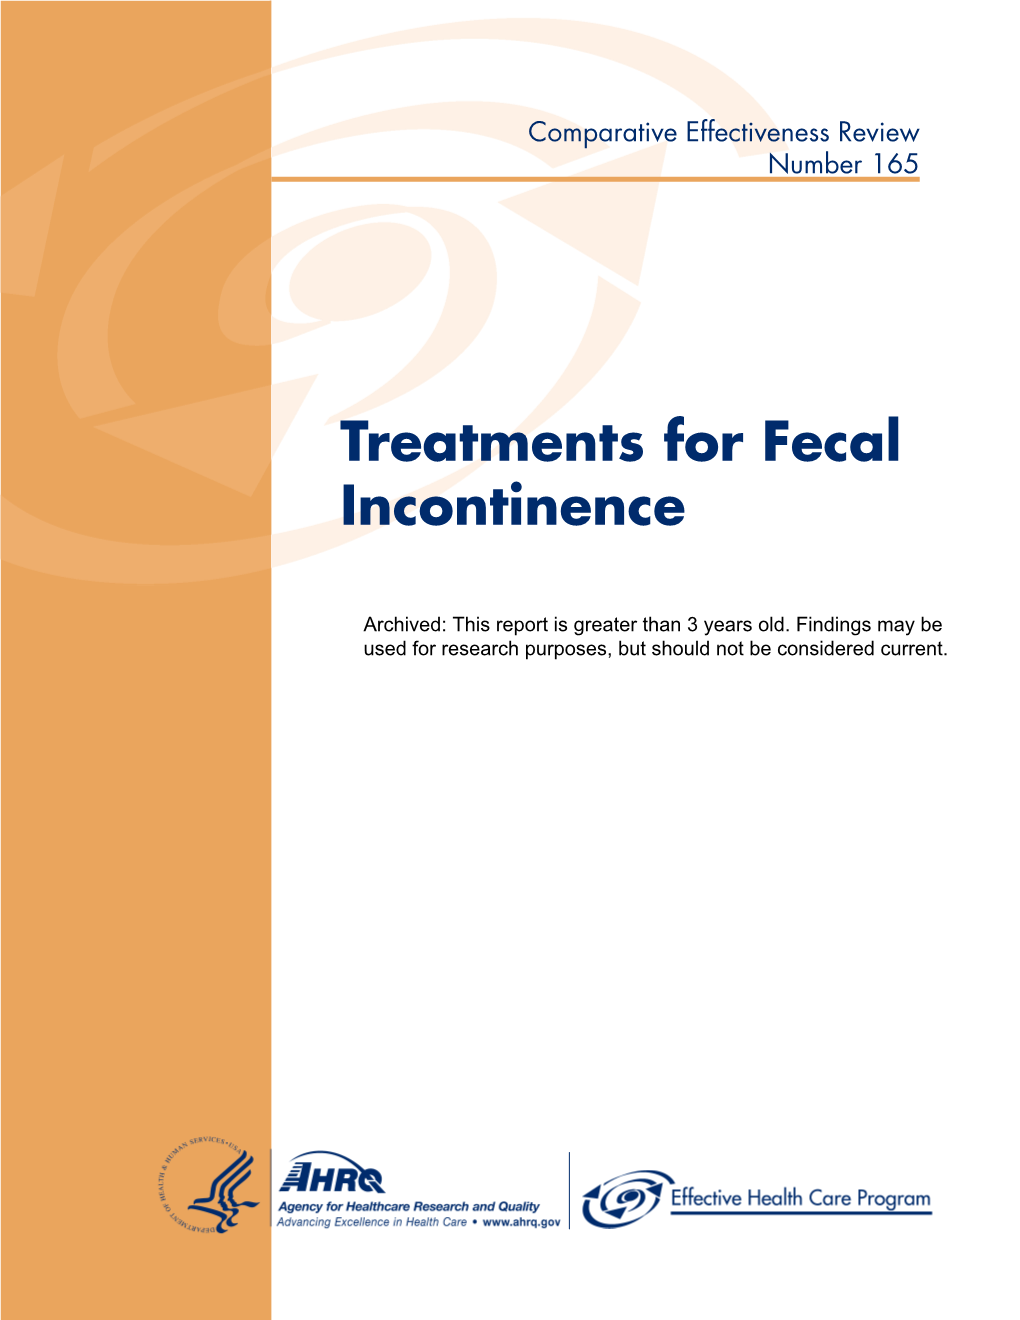 Treatments for Fecal Incontinence